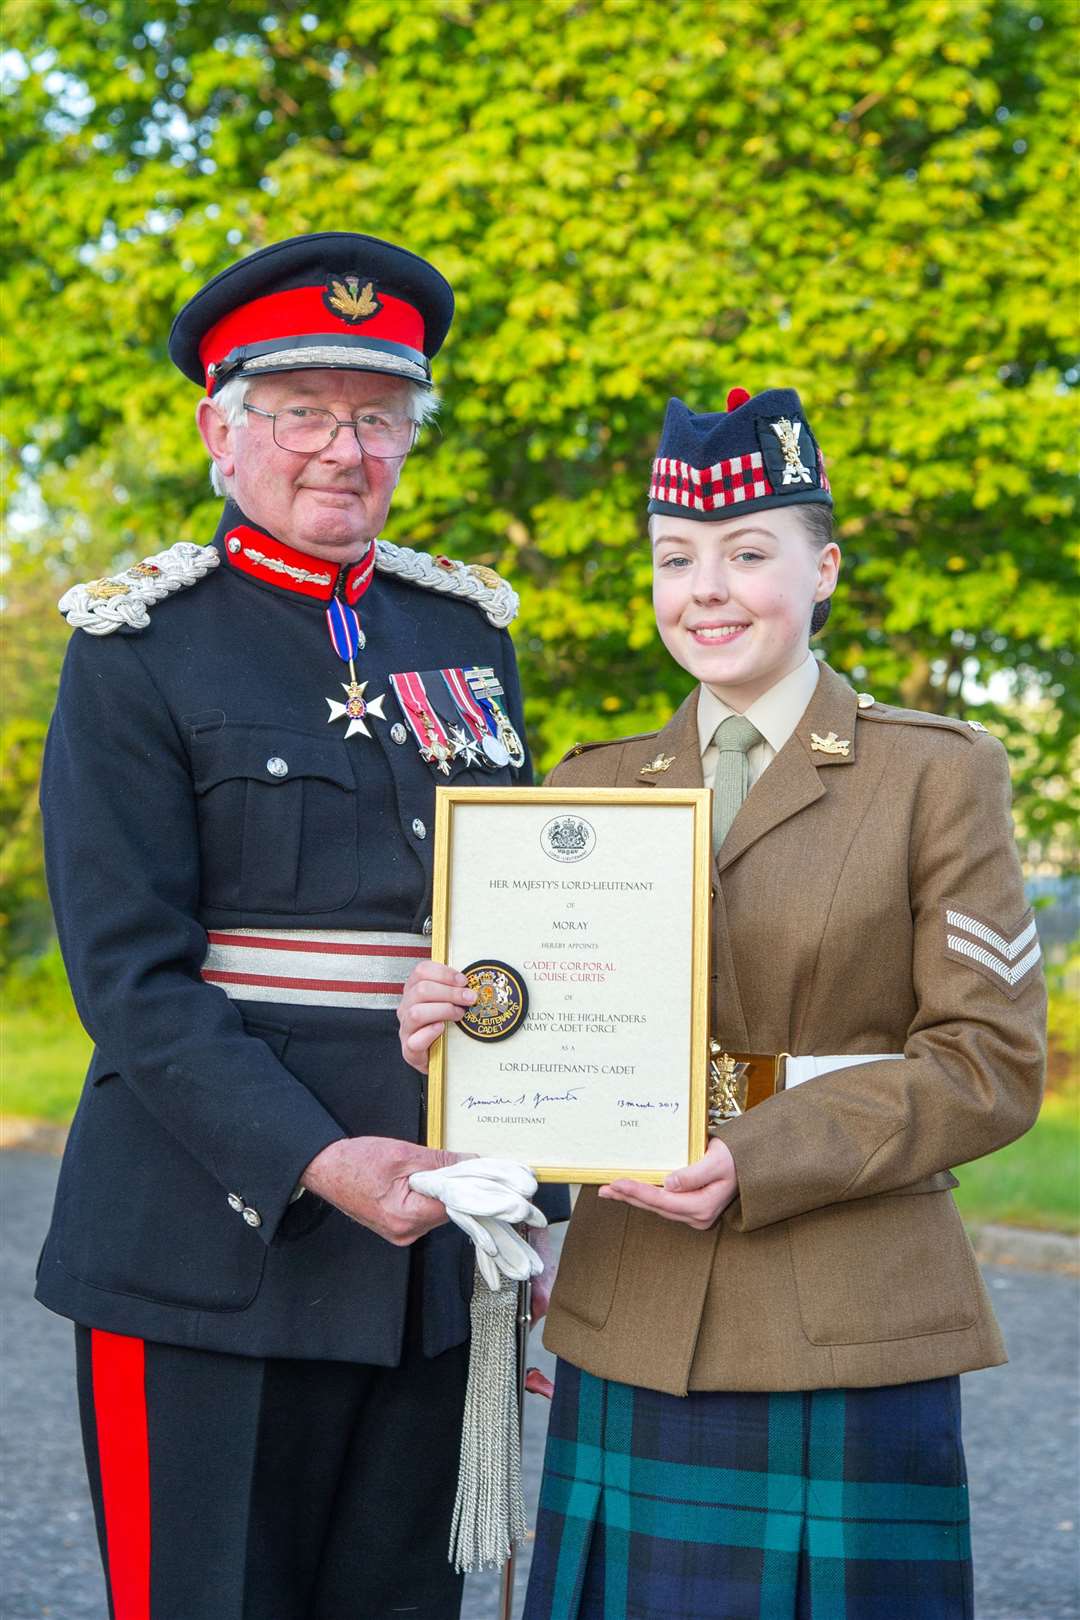 The Lord Lieutenant Grenville Johnston annouces Cpl Louise Curtis as the Lord Lieutenant's Cadet of Moray at the Elgin detachment of the 1st Battalion The Highlanders Army Cadet Force...Picture: Daniel Forsyth. Image No.043967.